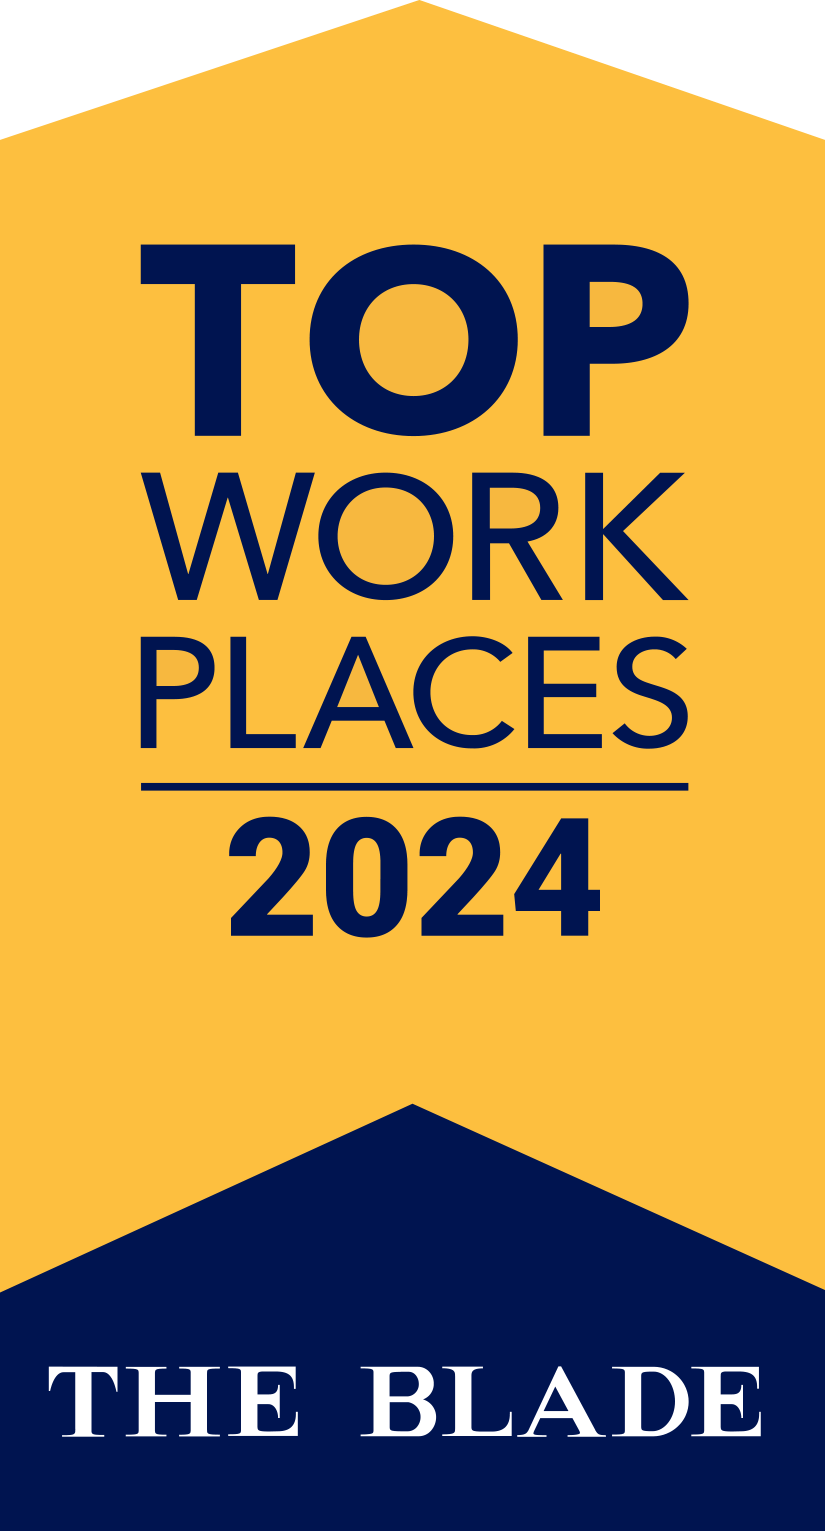 Top work places 2024